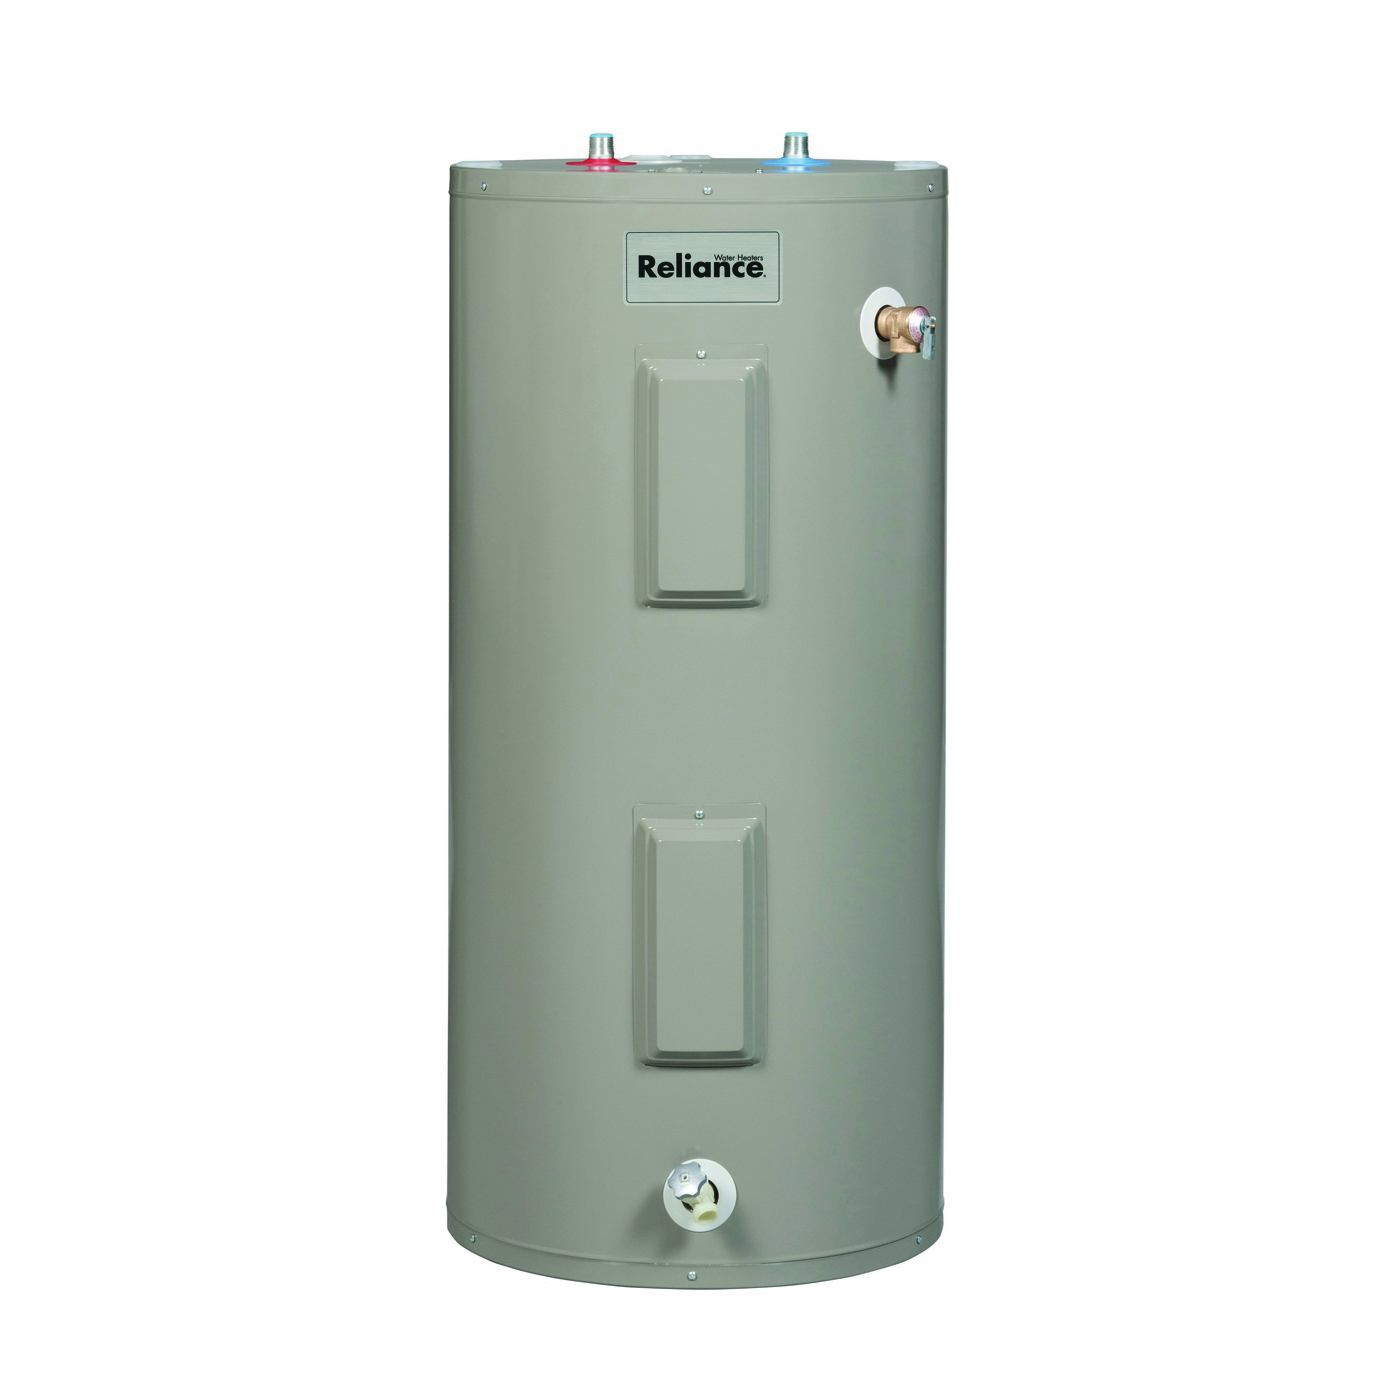 6 40 EORS Electric Water Heater, 30 A, 240 V, 6000 W, 40 gal Tank, 92 % Energy Efficiency